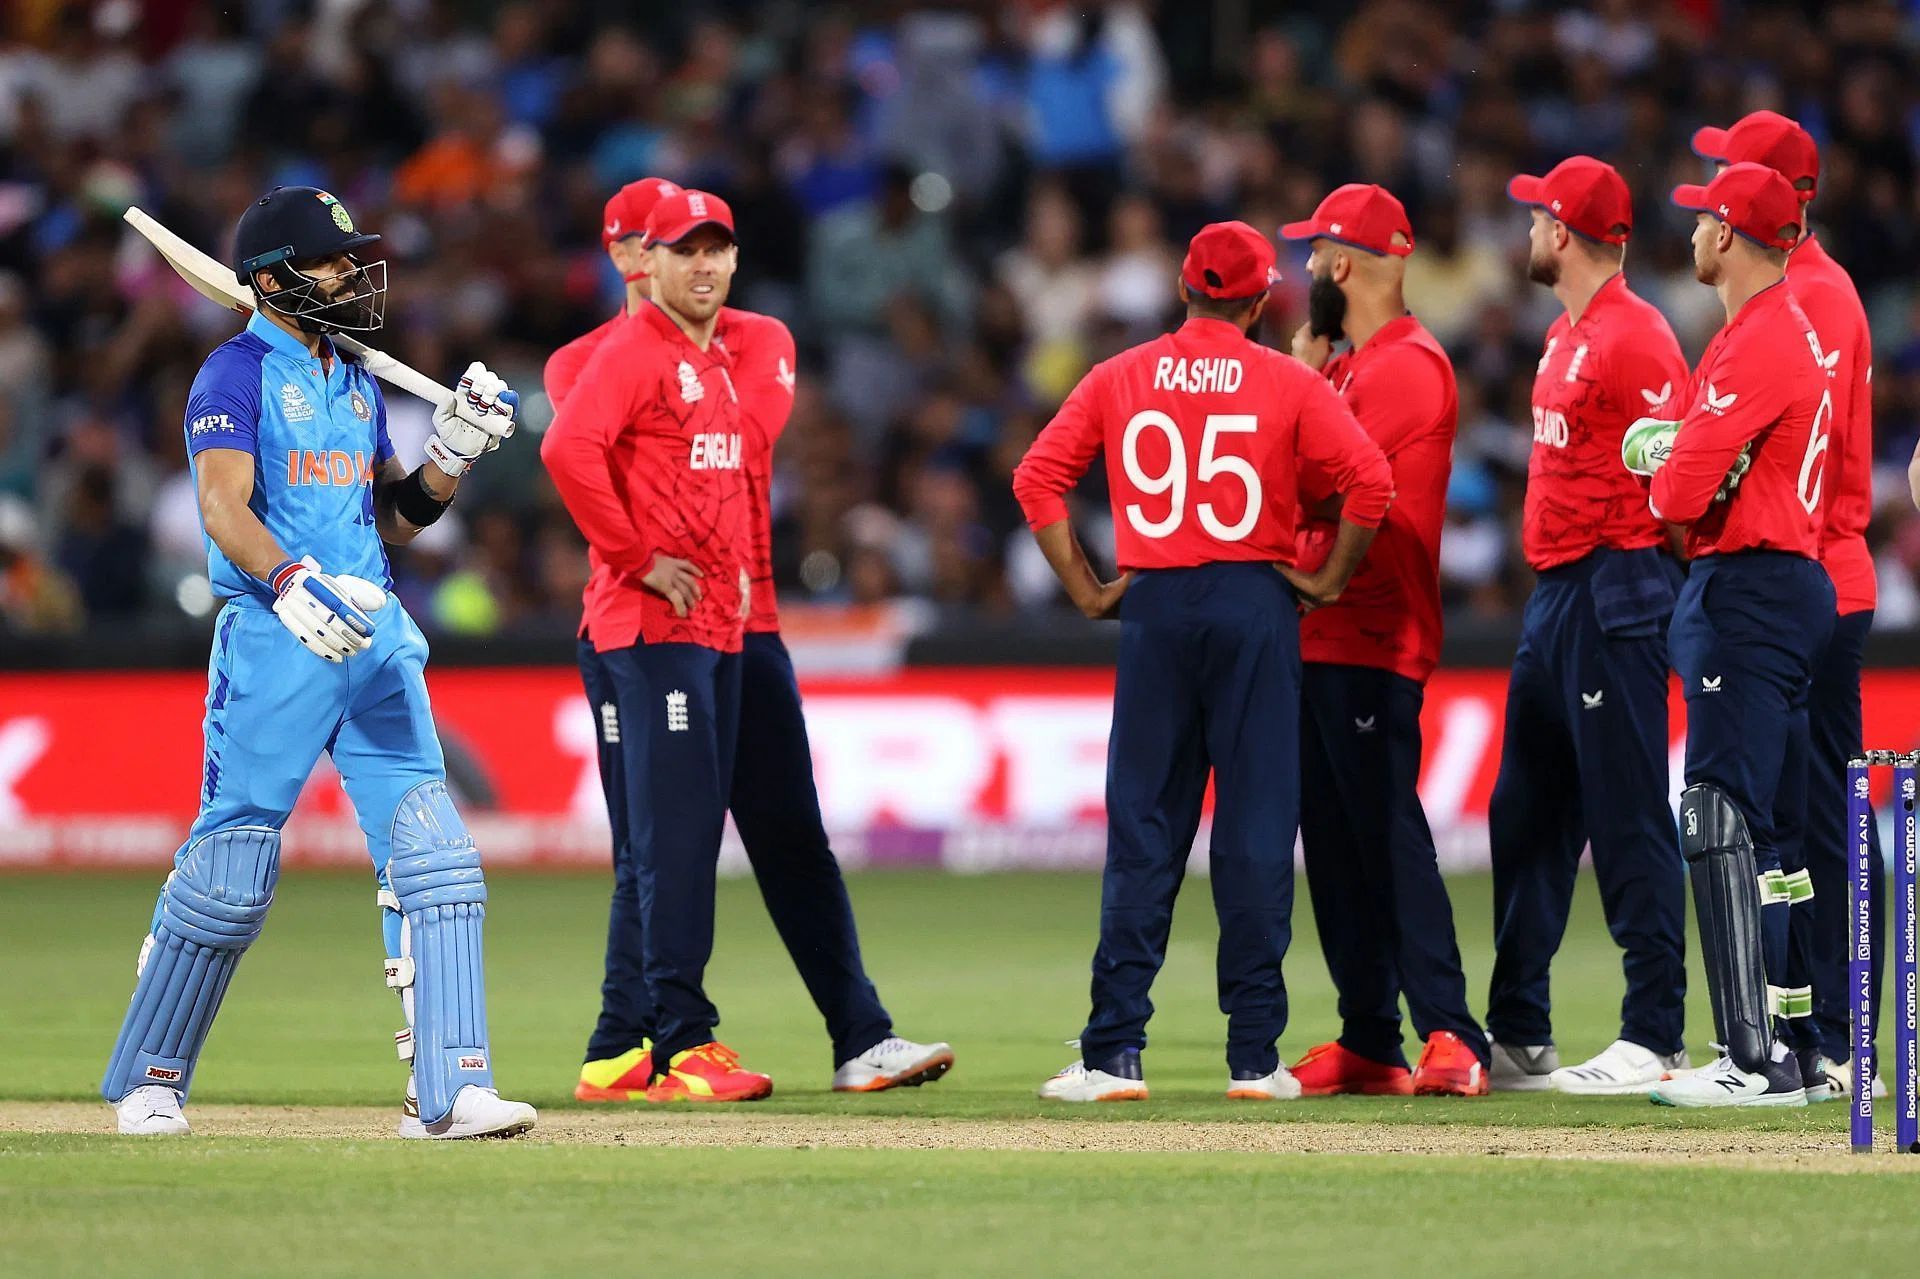 Virat Kohli scored his fourth half-century of the T20 World Cup 2022 the semi-final against England. However, he was dismissed for exactly 50 off 40 balls, just when Team India were hoping for him to accelerate. Pic: Getty Images